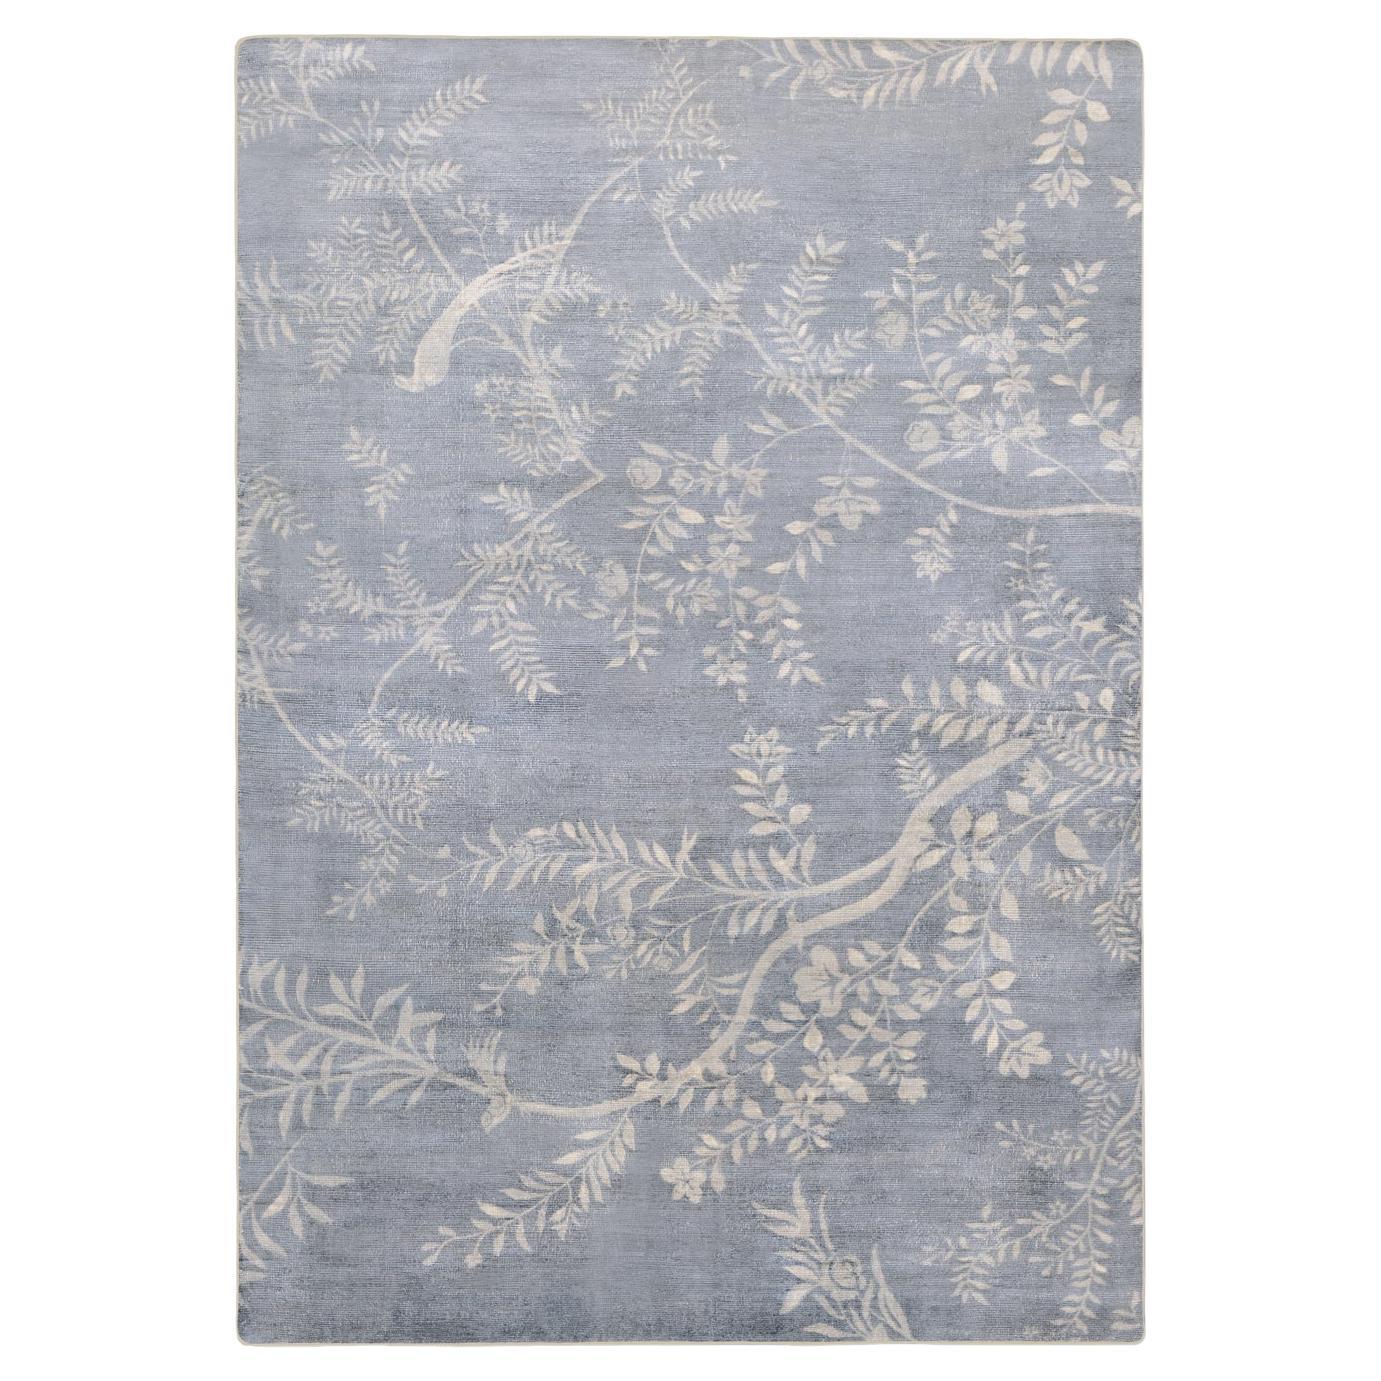 21st Cent Japanese Style Drawings Faded Blue Rug by Deanna Comellini 300x400 cm For Sale